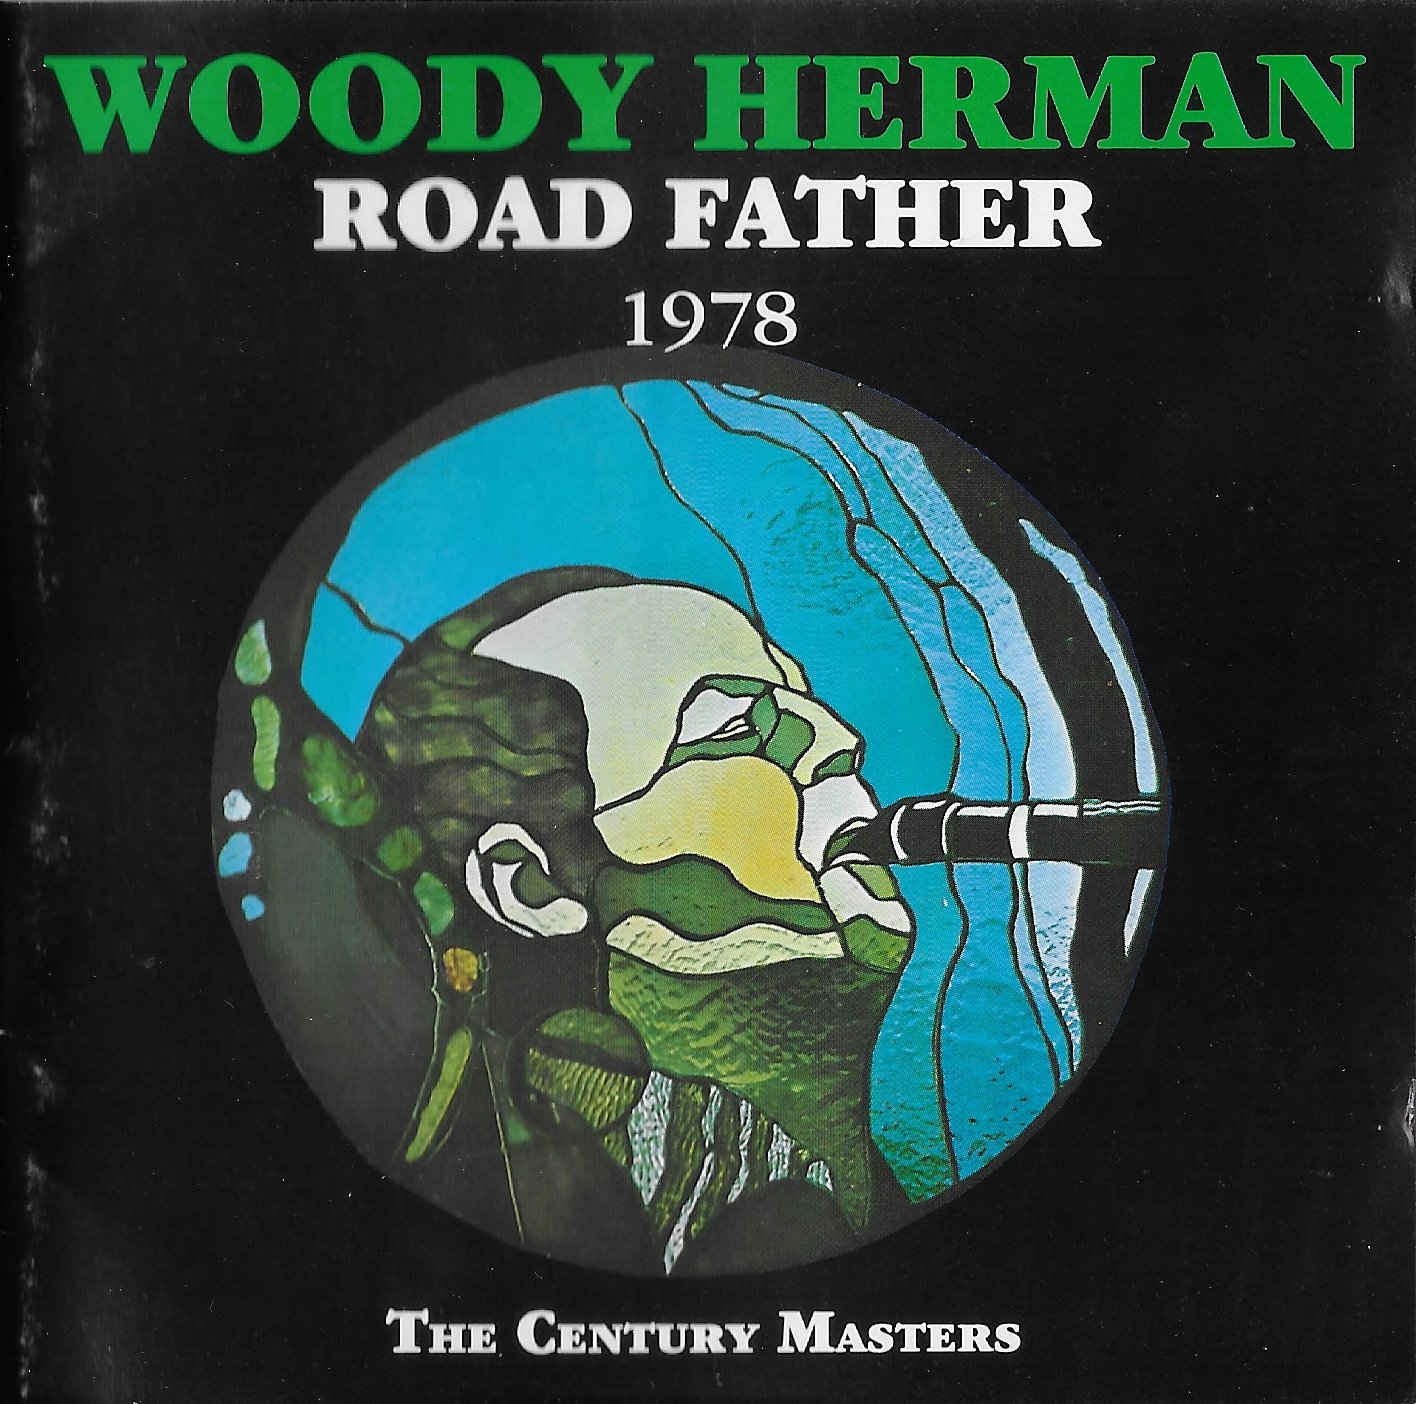 Picture of CJCD 829 The Century Catalogue - Road father - Woody Herman by artist Woody Herman from the BBC cds - Records and Tapes library